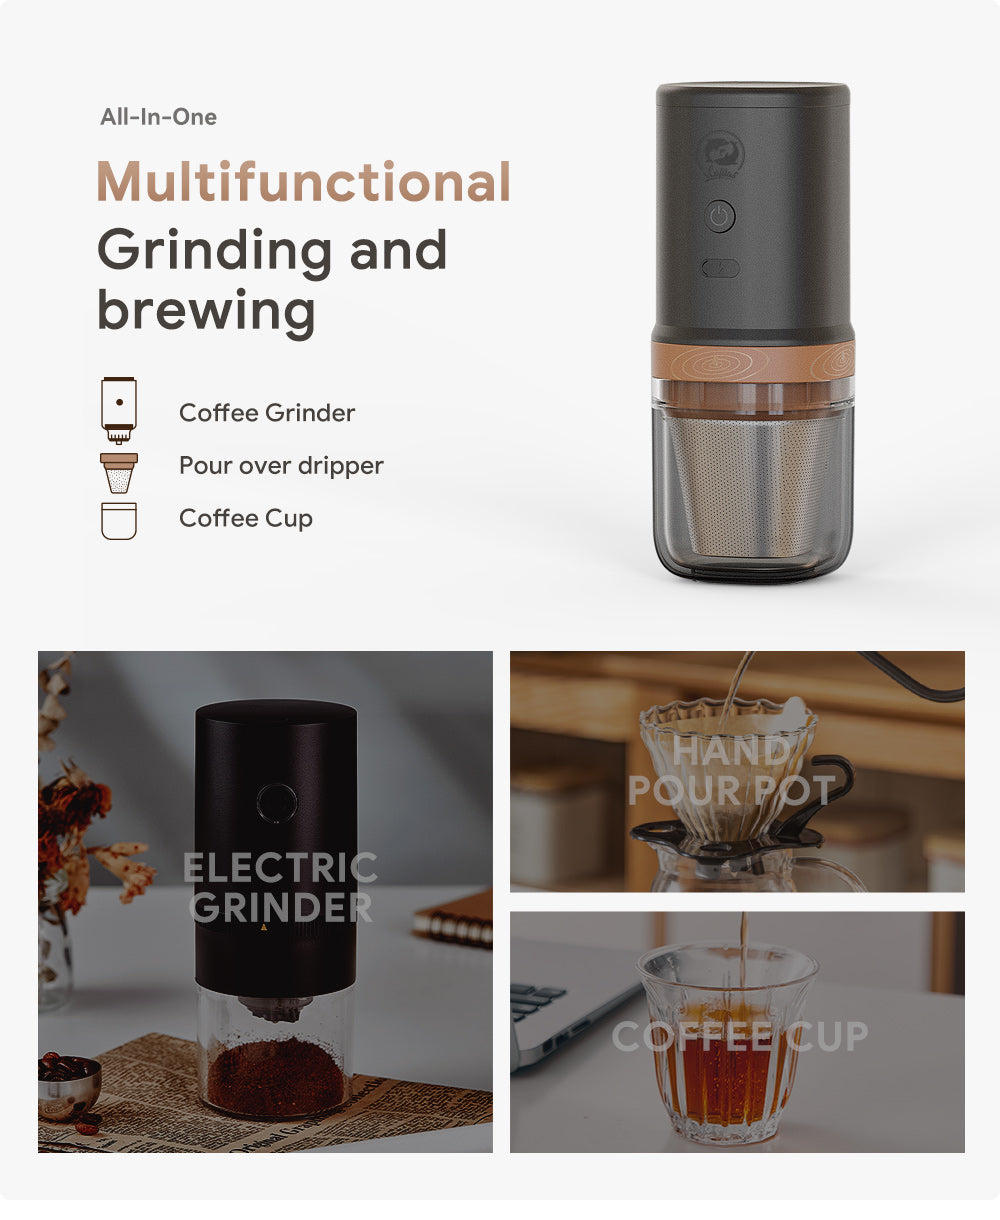 New Upgraded Automatic Portable Electric Coffee Grinder Can Grind Grains and Beans Drip Machine USB Charger